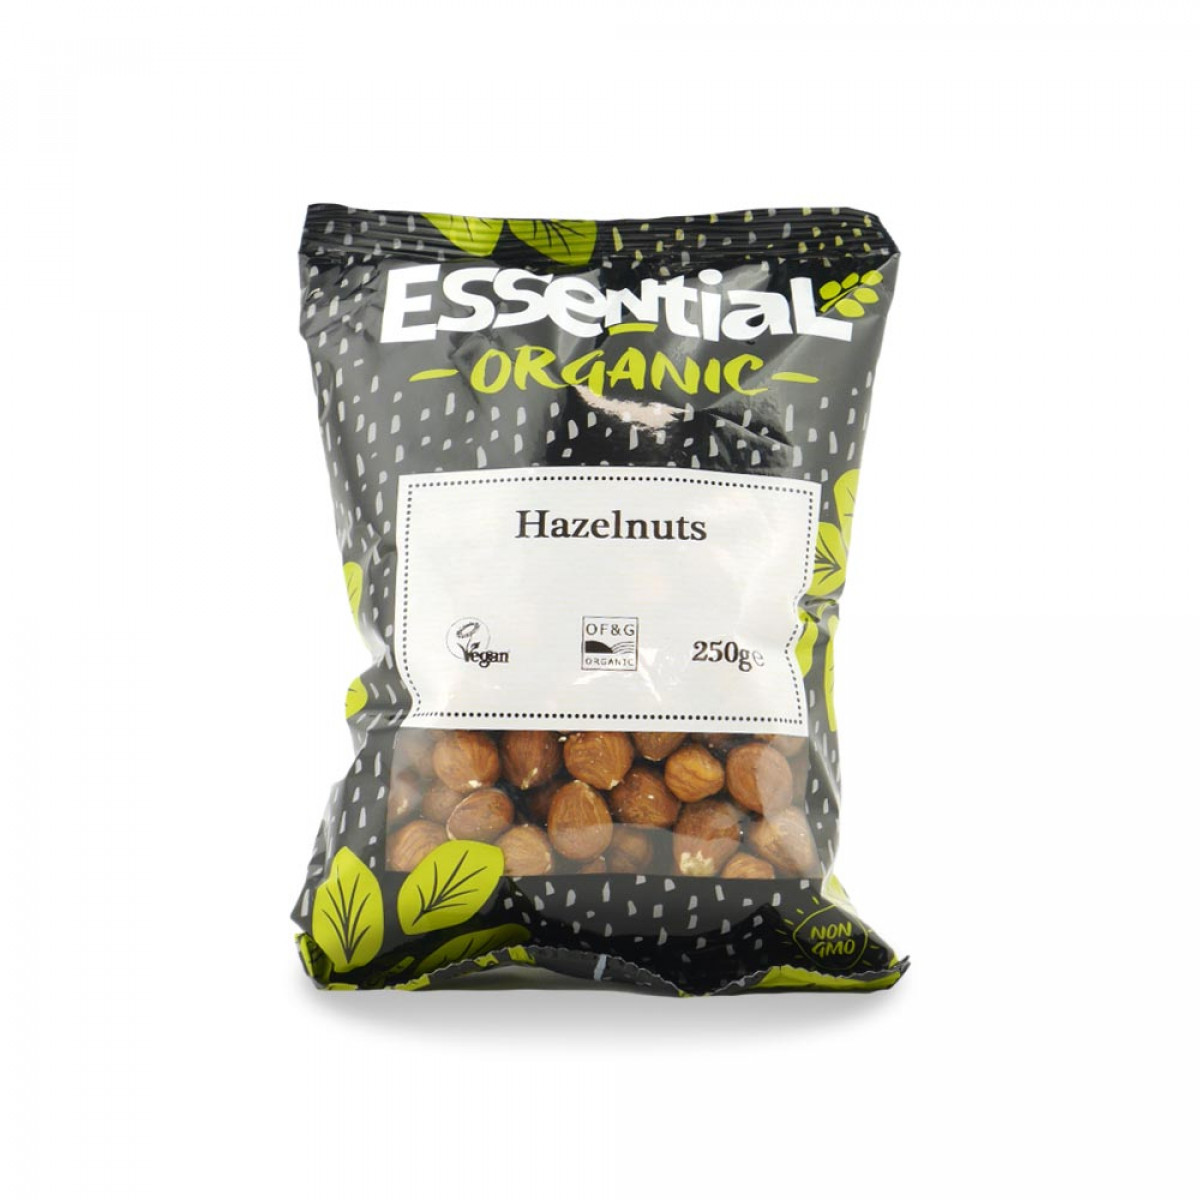 Product picture for Hazelnuts - Whole